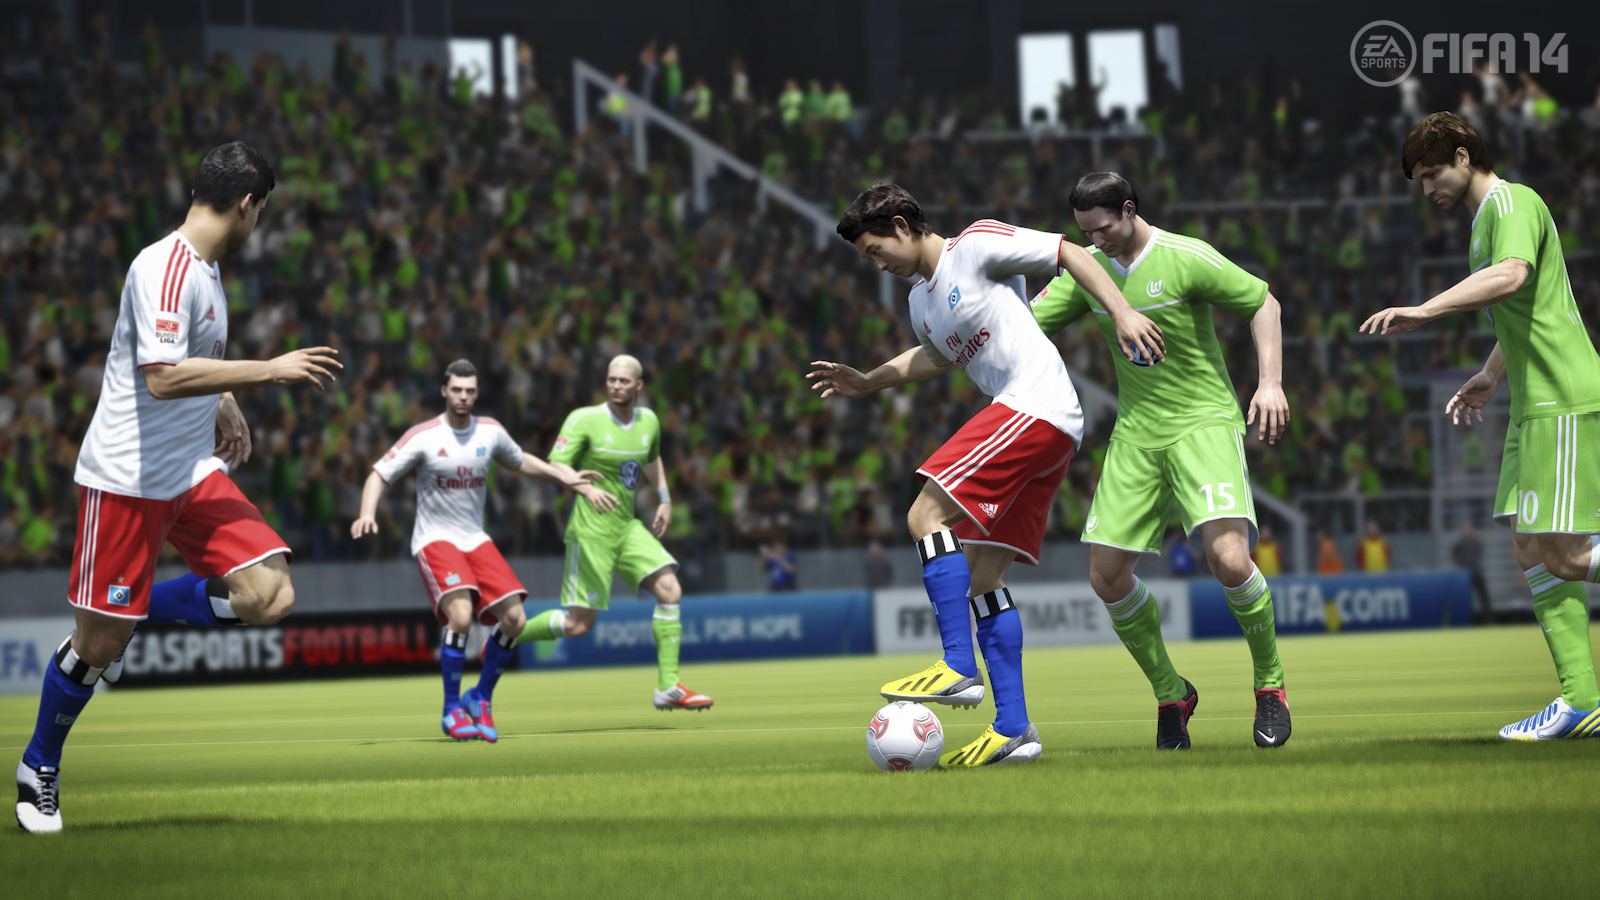 Media asset in full size related to 3dfxzone.it news item entitled as follows: EA Sports annuncia FIFA 14 e mostra i primi screenshots in-game | Image Name: news19364_FIFA-14-screenshot_2.jpg